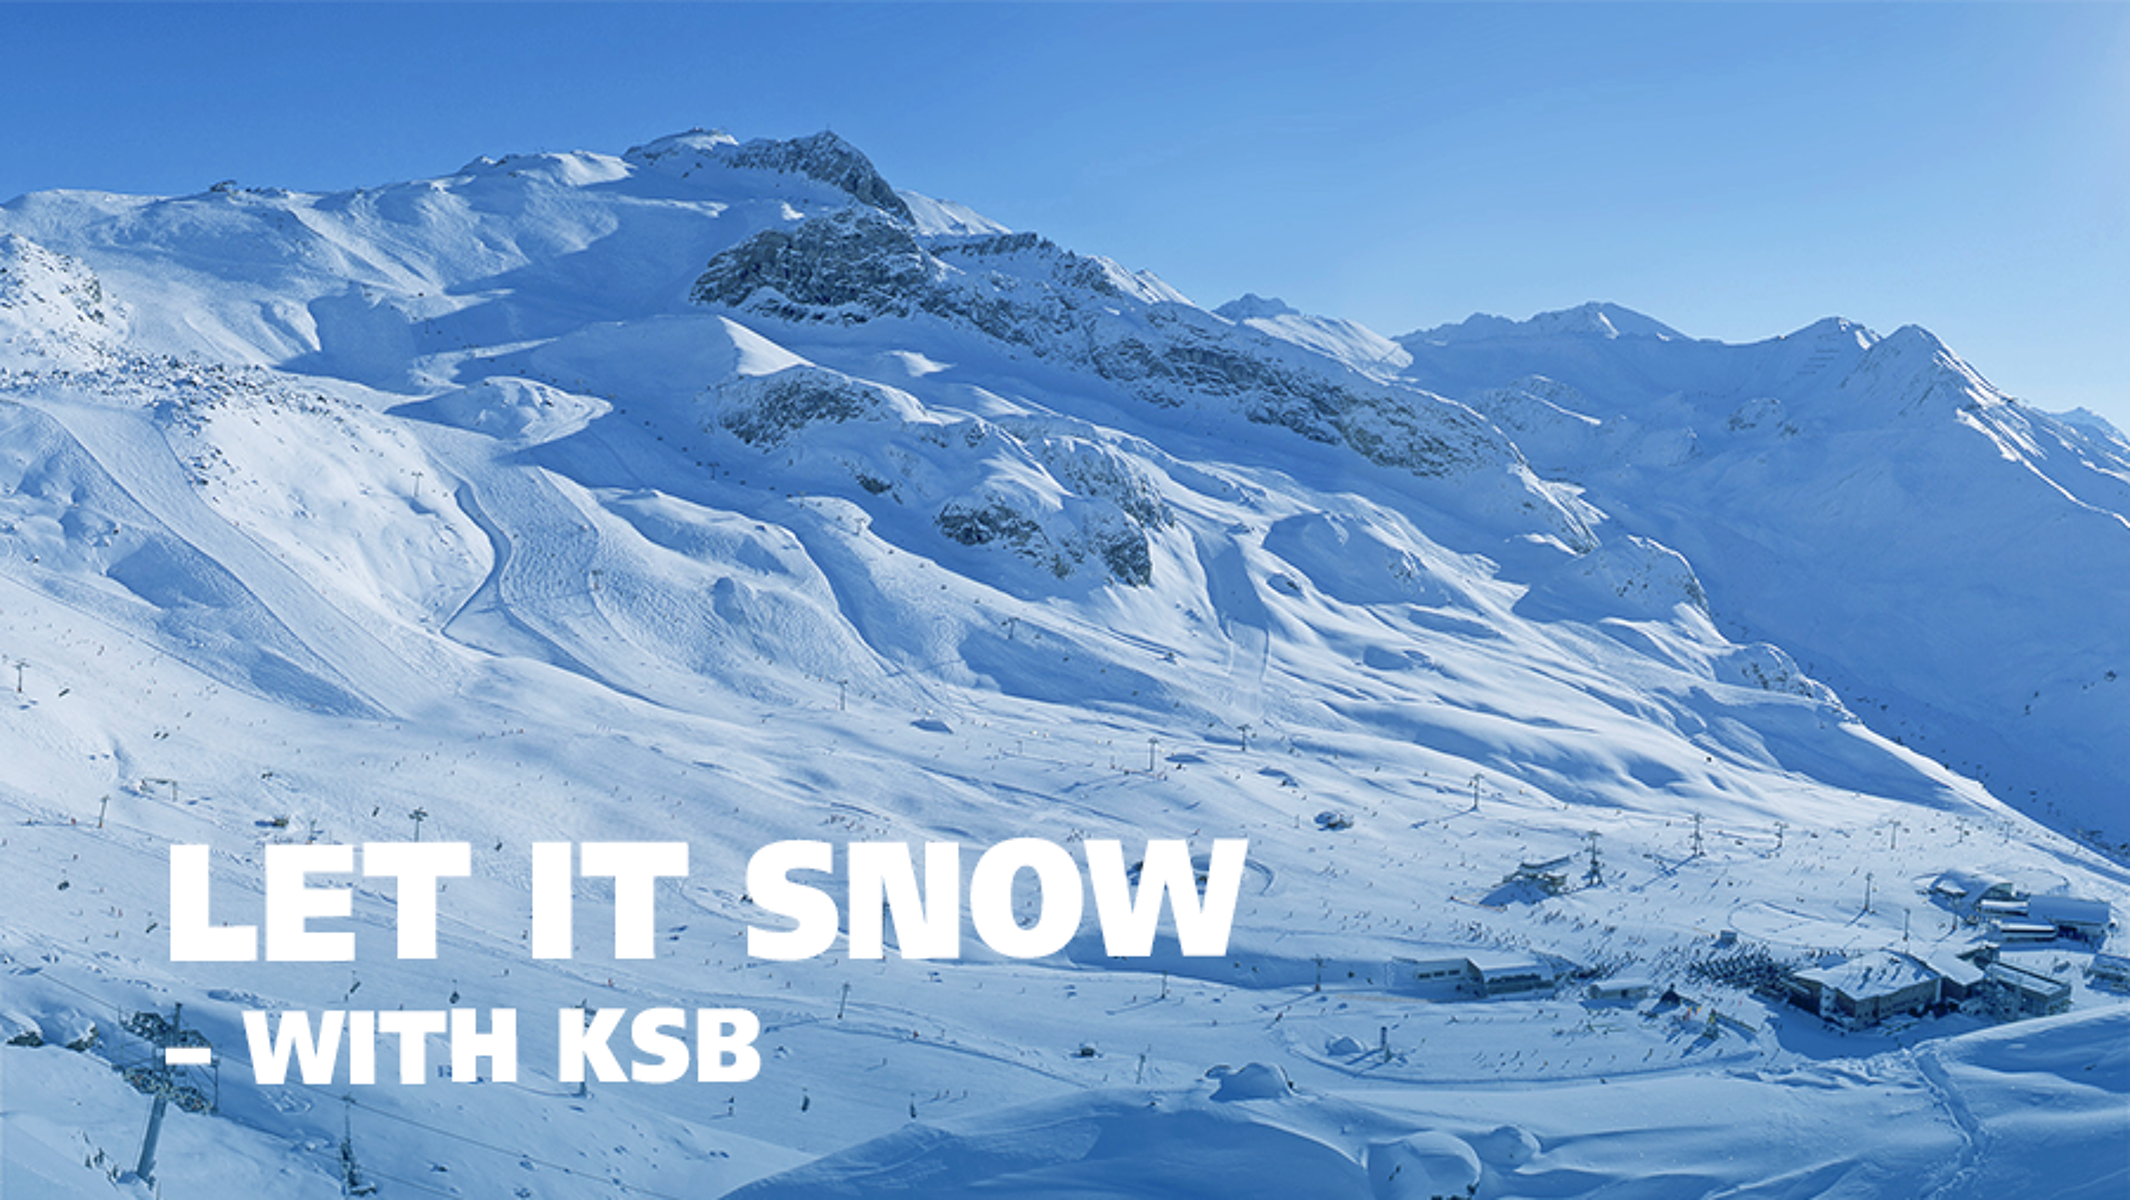 White slopes – with snow-making by KSB